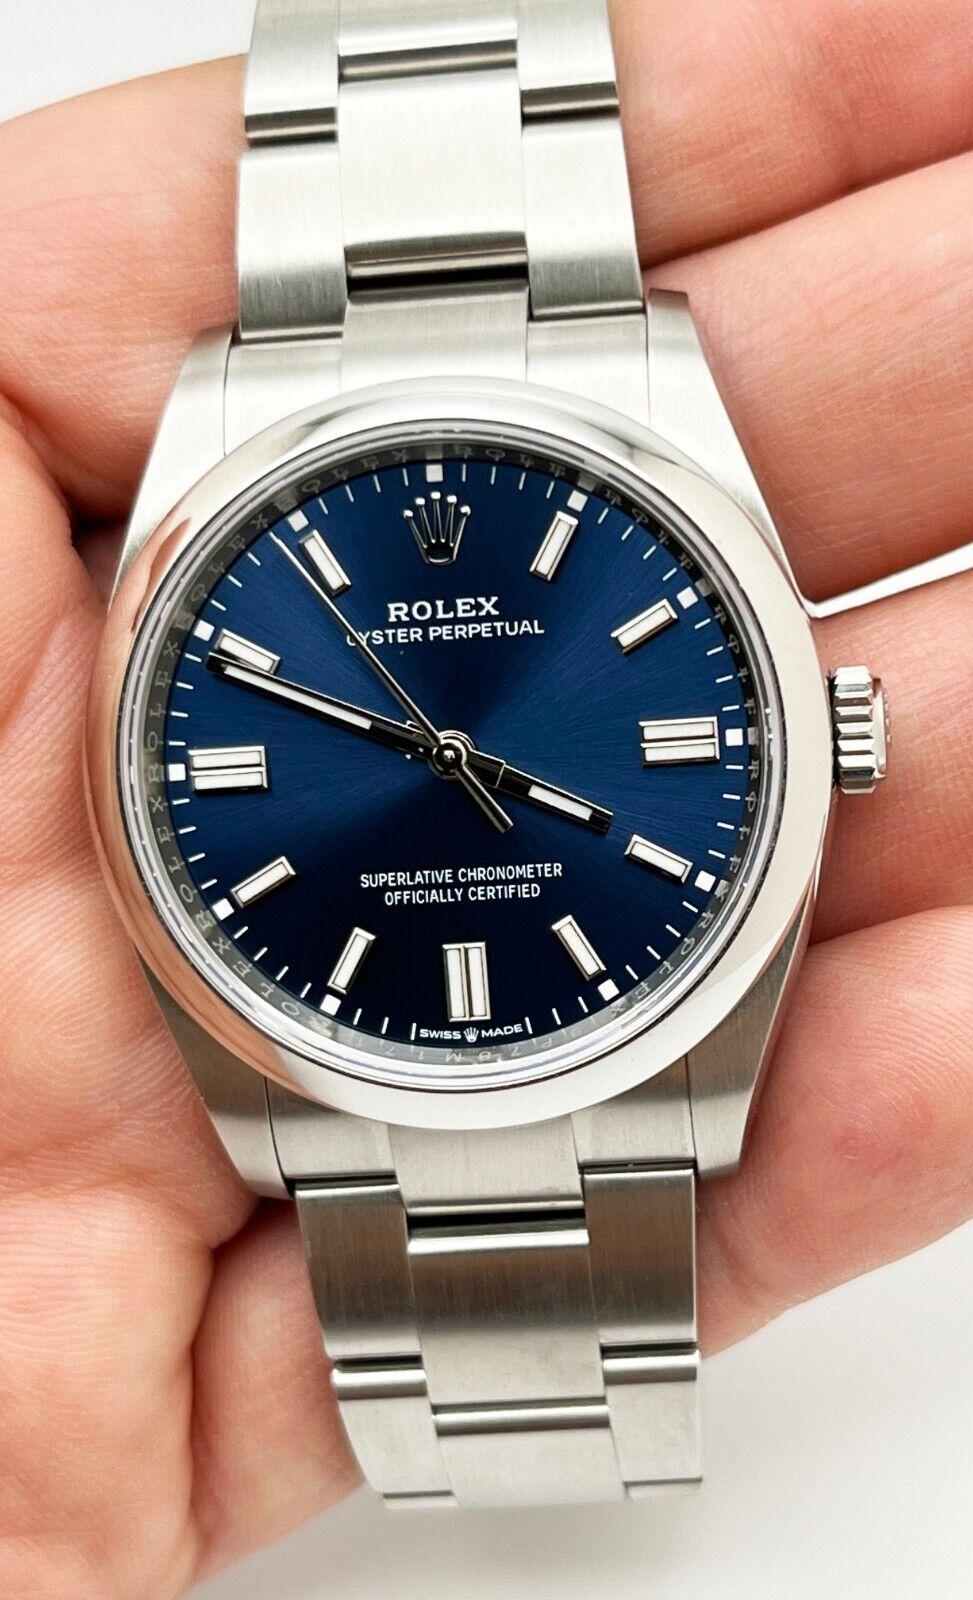 Style Number: 126000

Serial: 8P78M***

Year: 2021
 
Model: Oyster Perpetual 
 
Case Material: Stainless Steel 
 
Band: Stainless Steel
 
Bezel: Stainless Steel
 
Dial: Blue
 
Face: Sapphire Crystal 
 
Case Size: 36mm 
 
Includes: 
-Rolex Box &